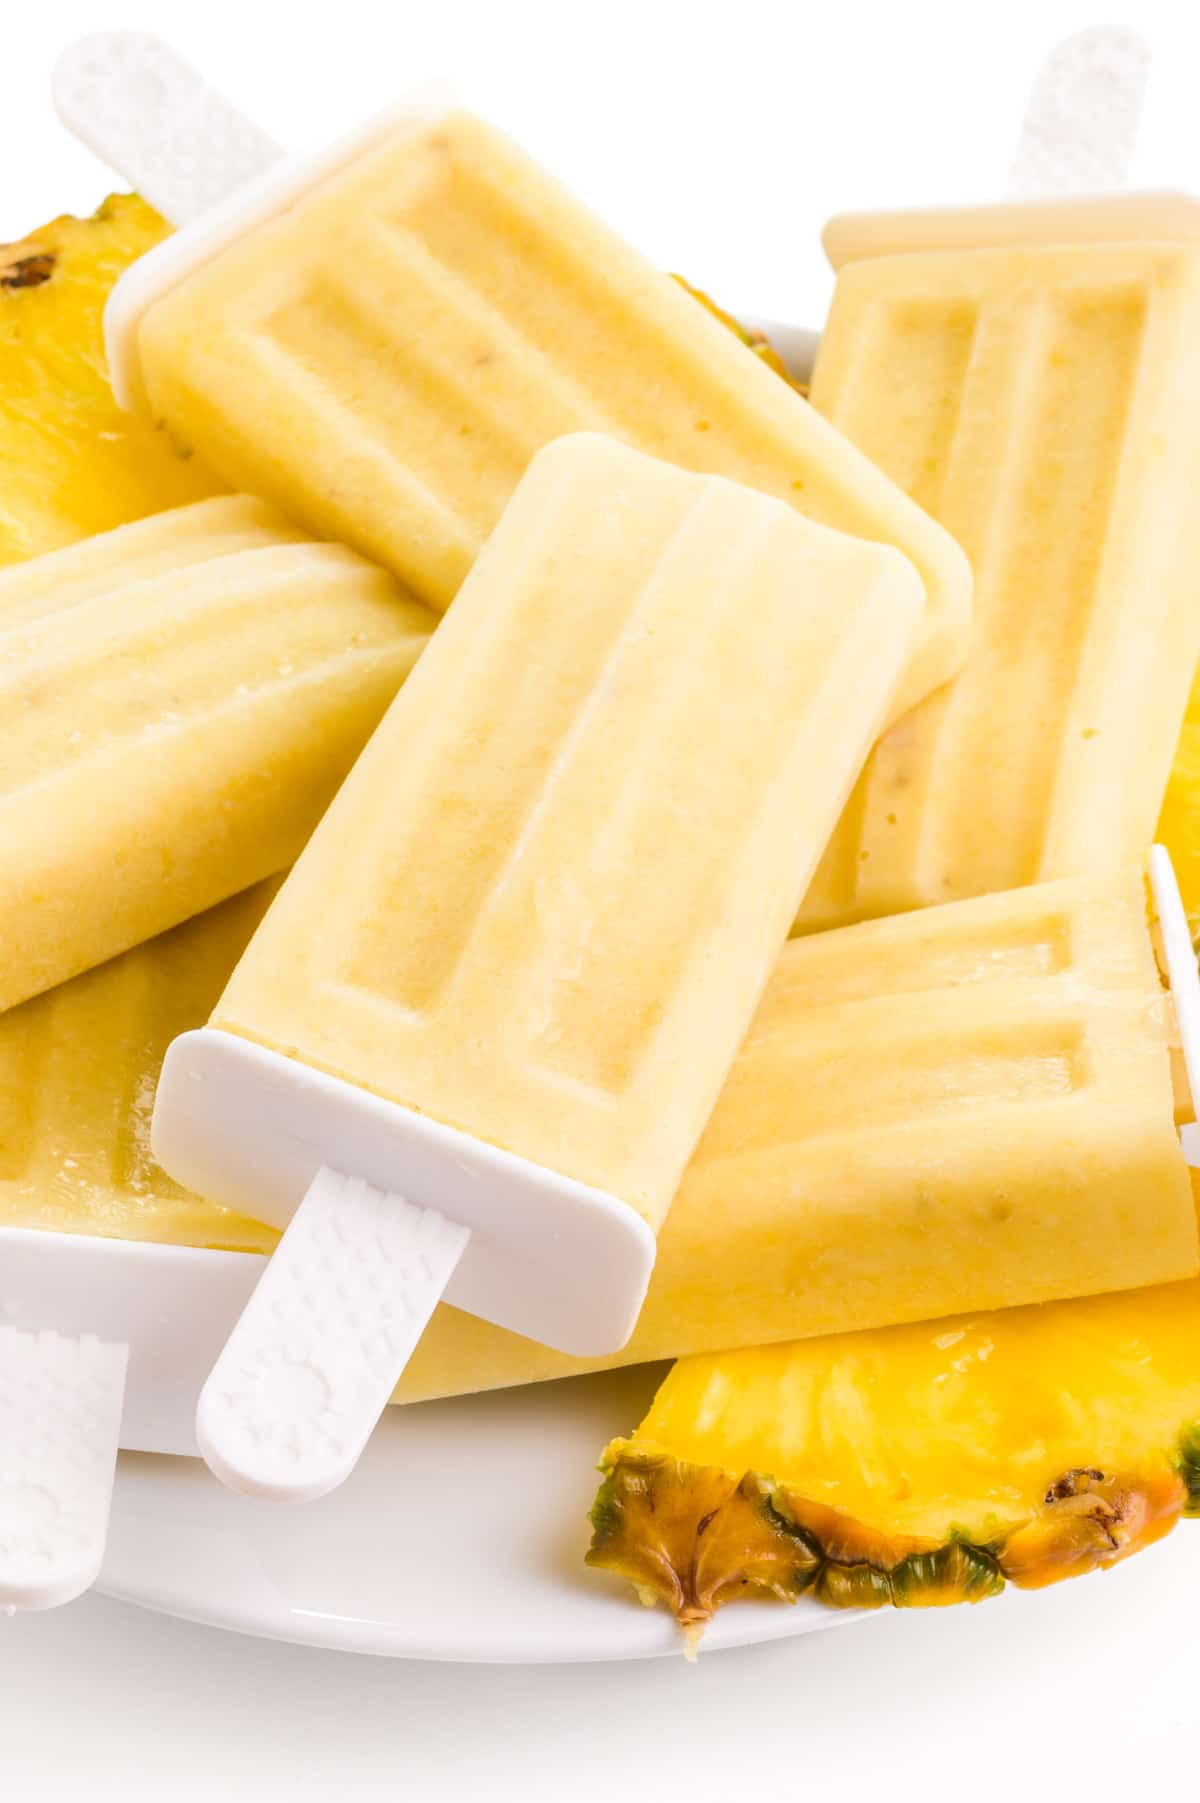 A plate of pineapple popsicles also has pineapple wedges cut into them.